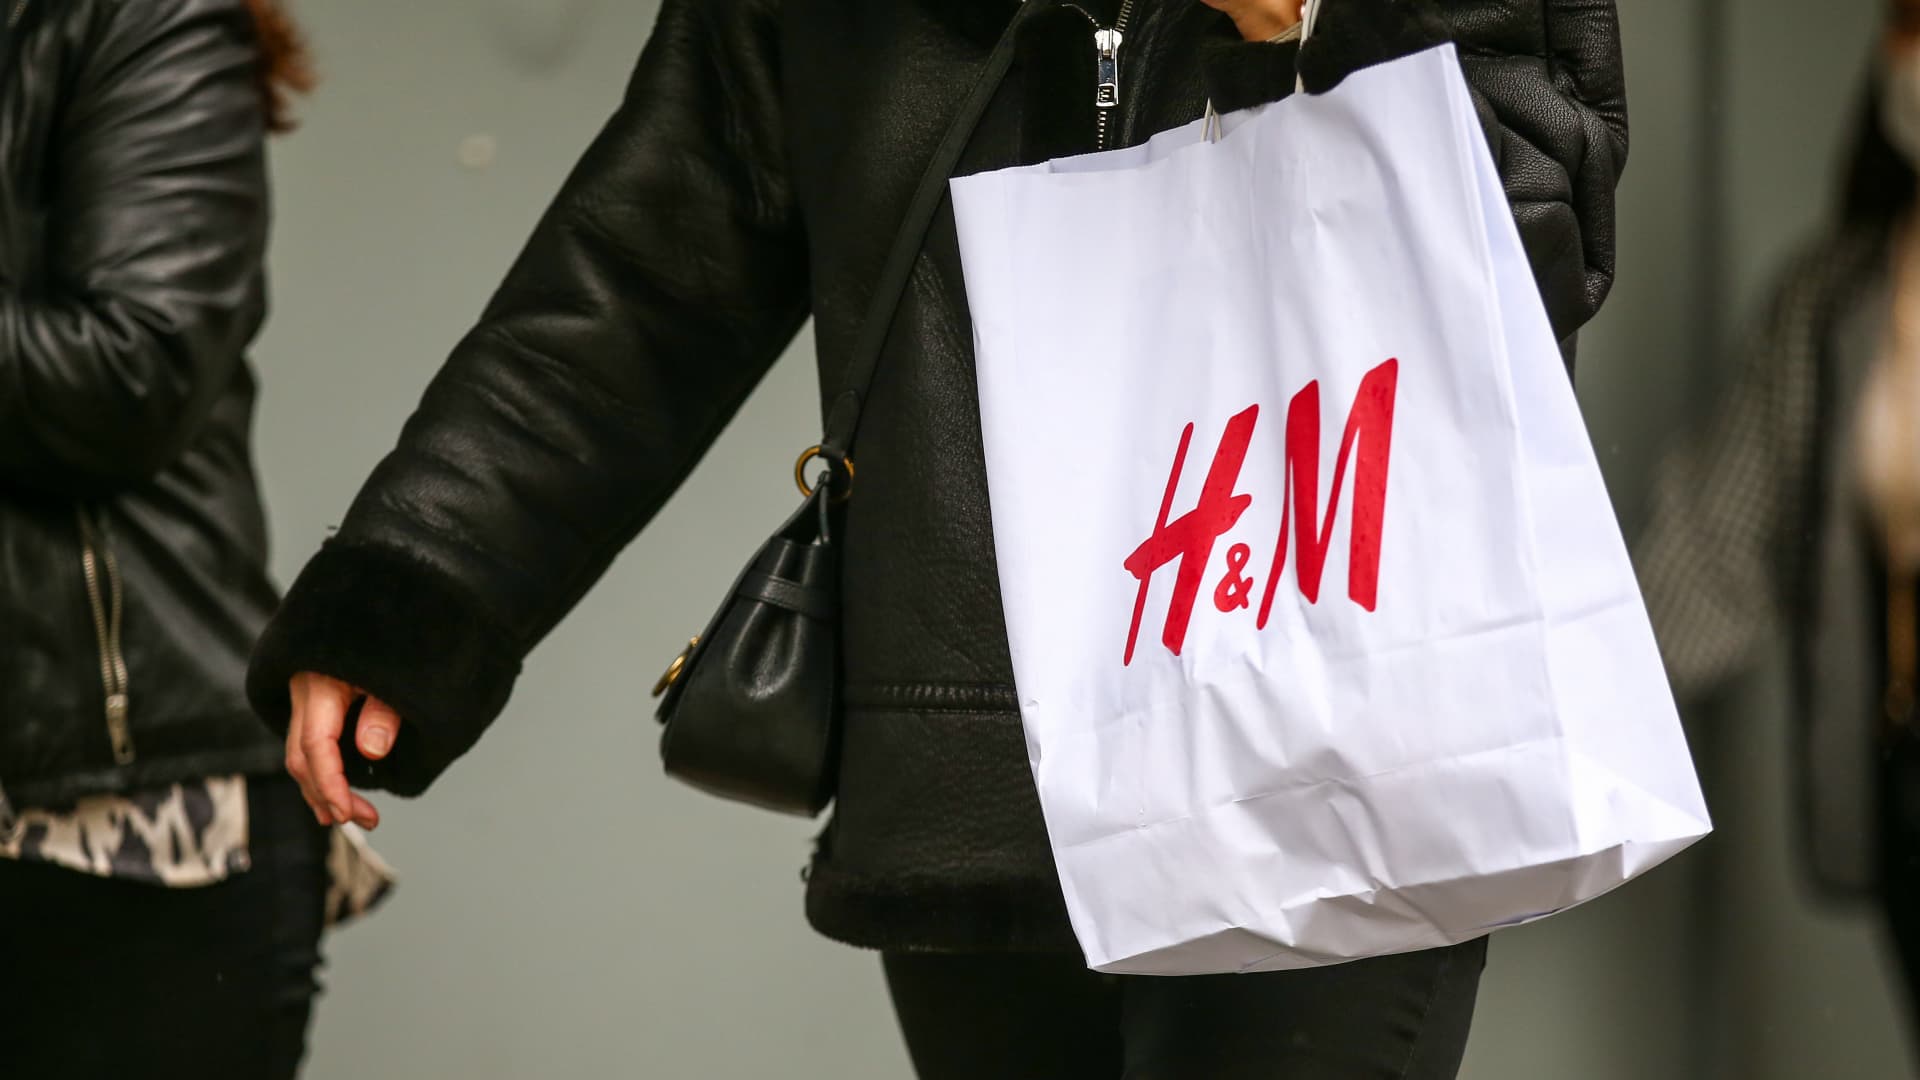 H&M's sales recover in March as stores reopen after lockdowns